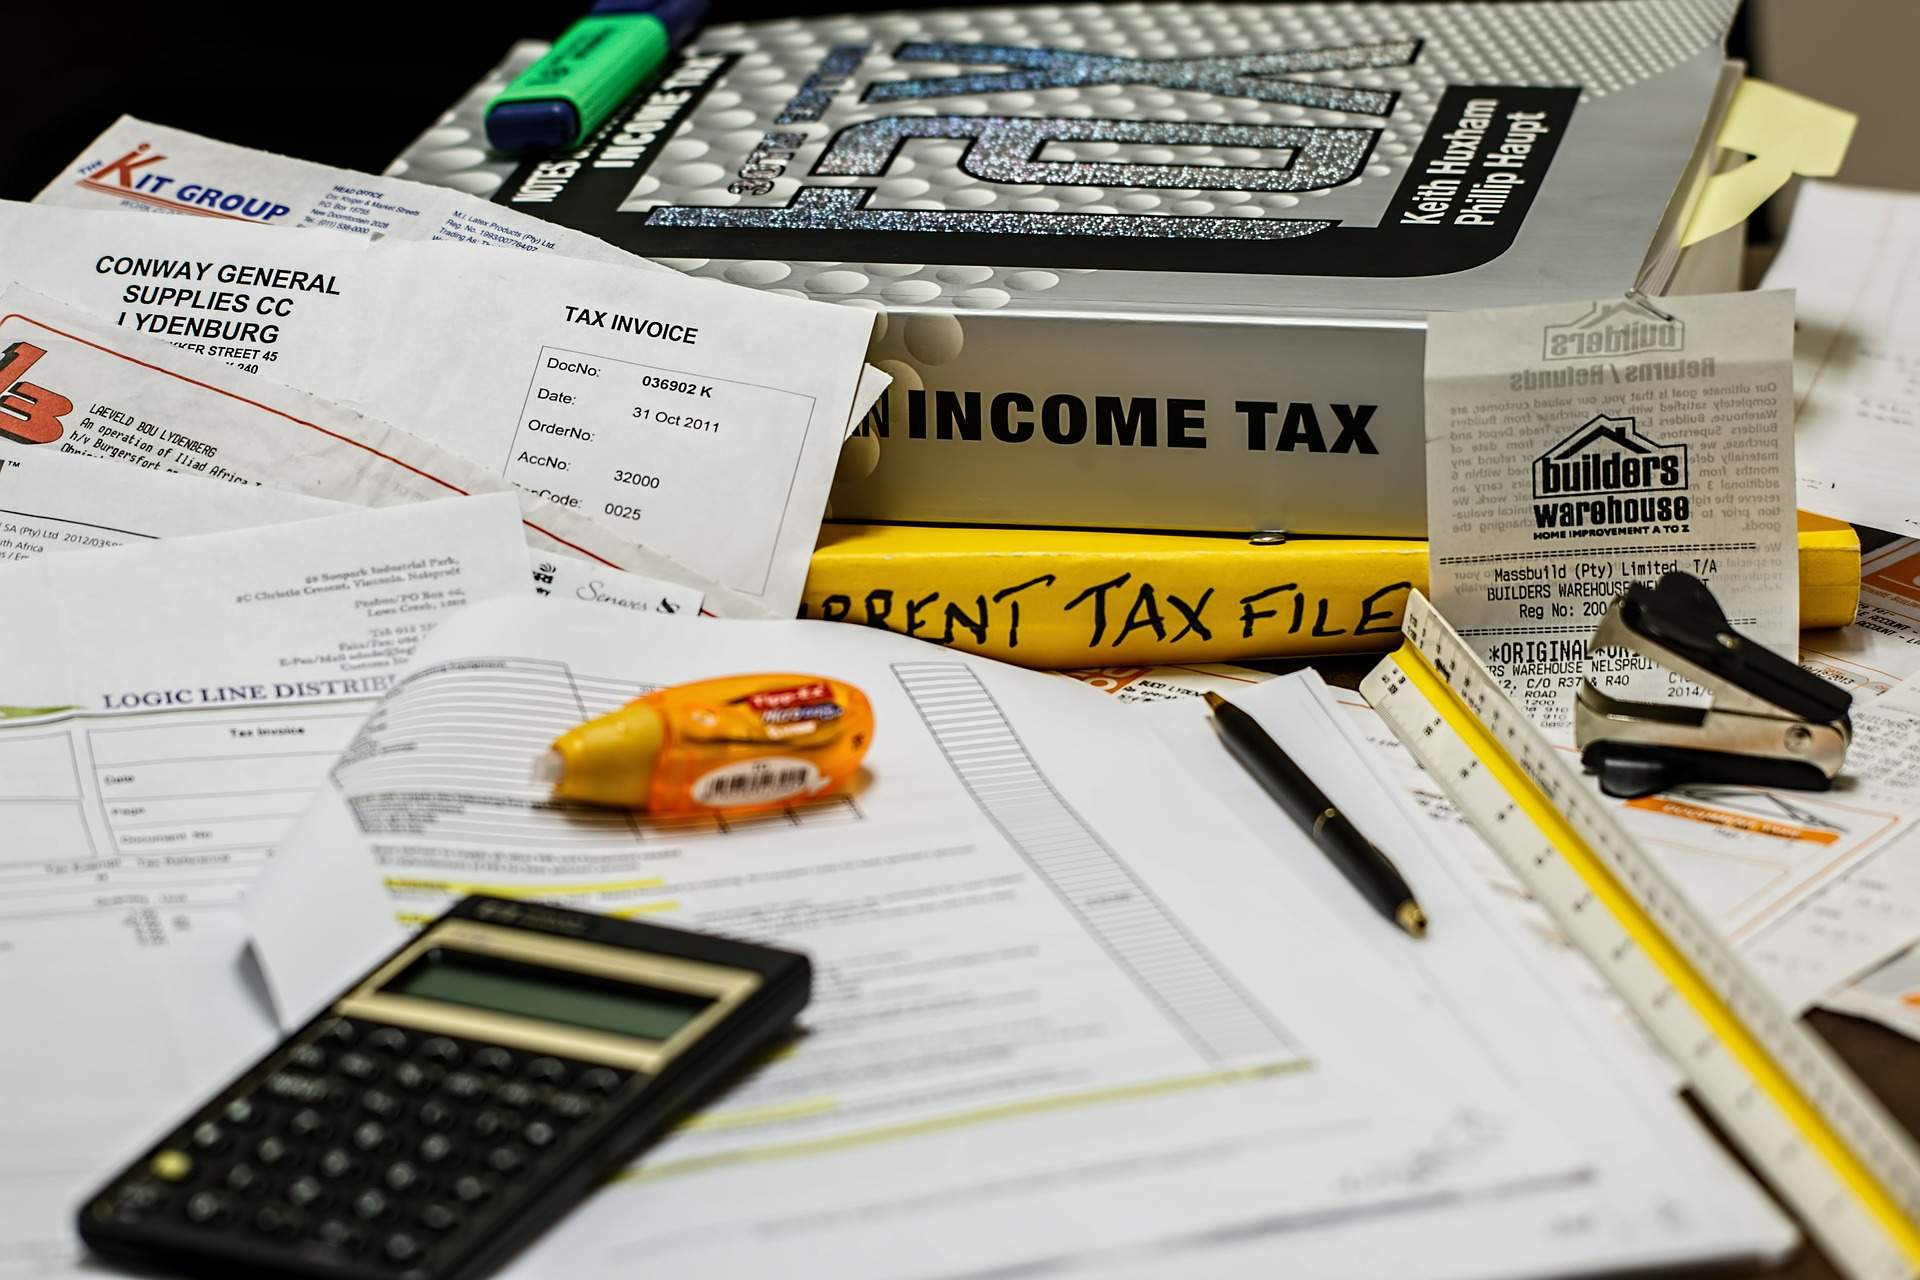 You are currently viewing Taxpayers Receive Their Own Neighbors Tax Forms In IRS Mix-Up